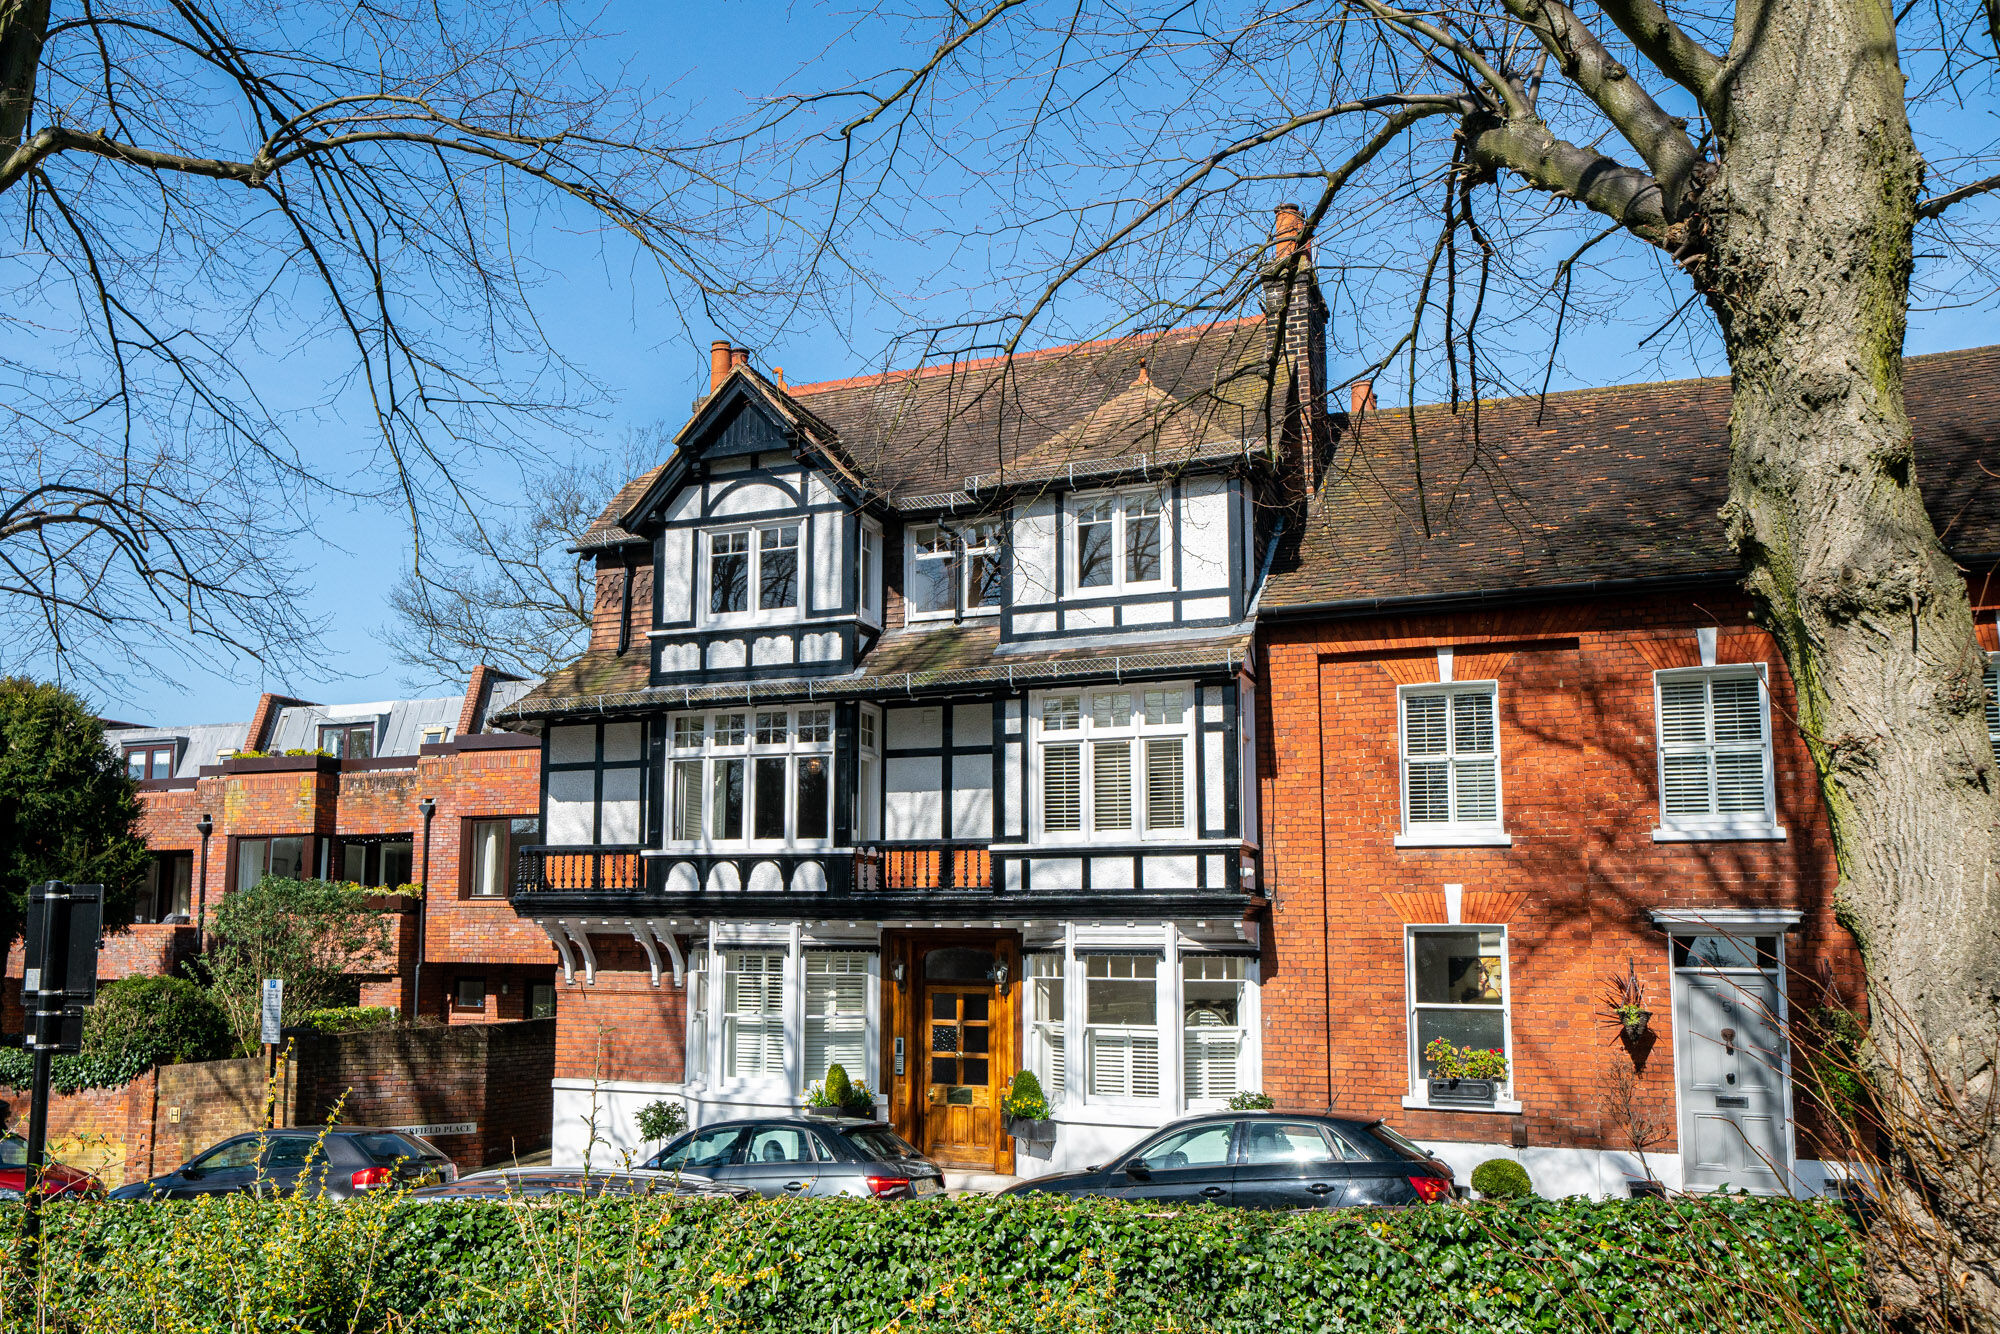 2 bedroom  flat to rent, Available now Romeland Hill, St Albans, AL3, main image